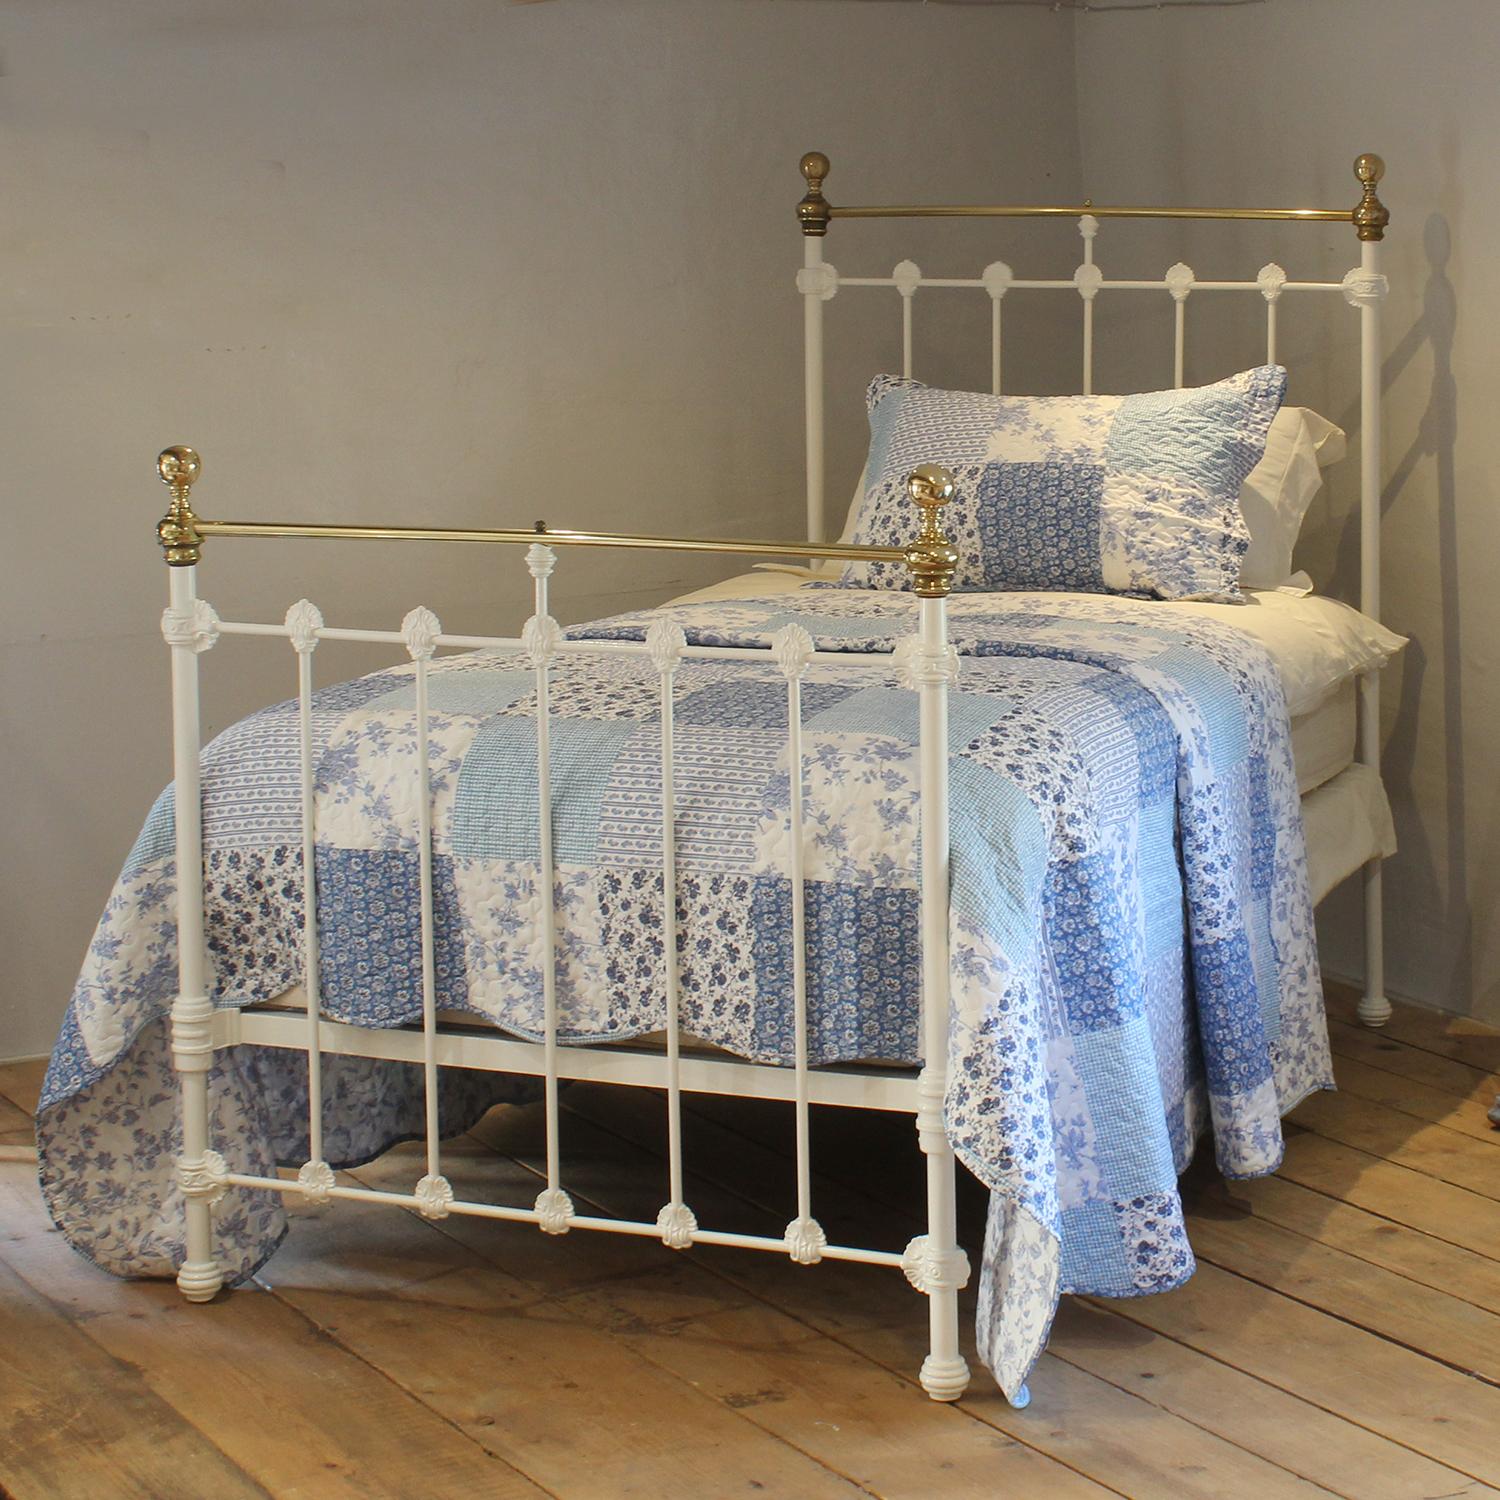 A traditional style Victorian antique bed painted in white, with straight brass top rails, and decorative castings on the head and foot board. 
This bed takes a large single 3ft 6in wide x 6ft 3in long base and mattress.
The price includes a firm